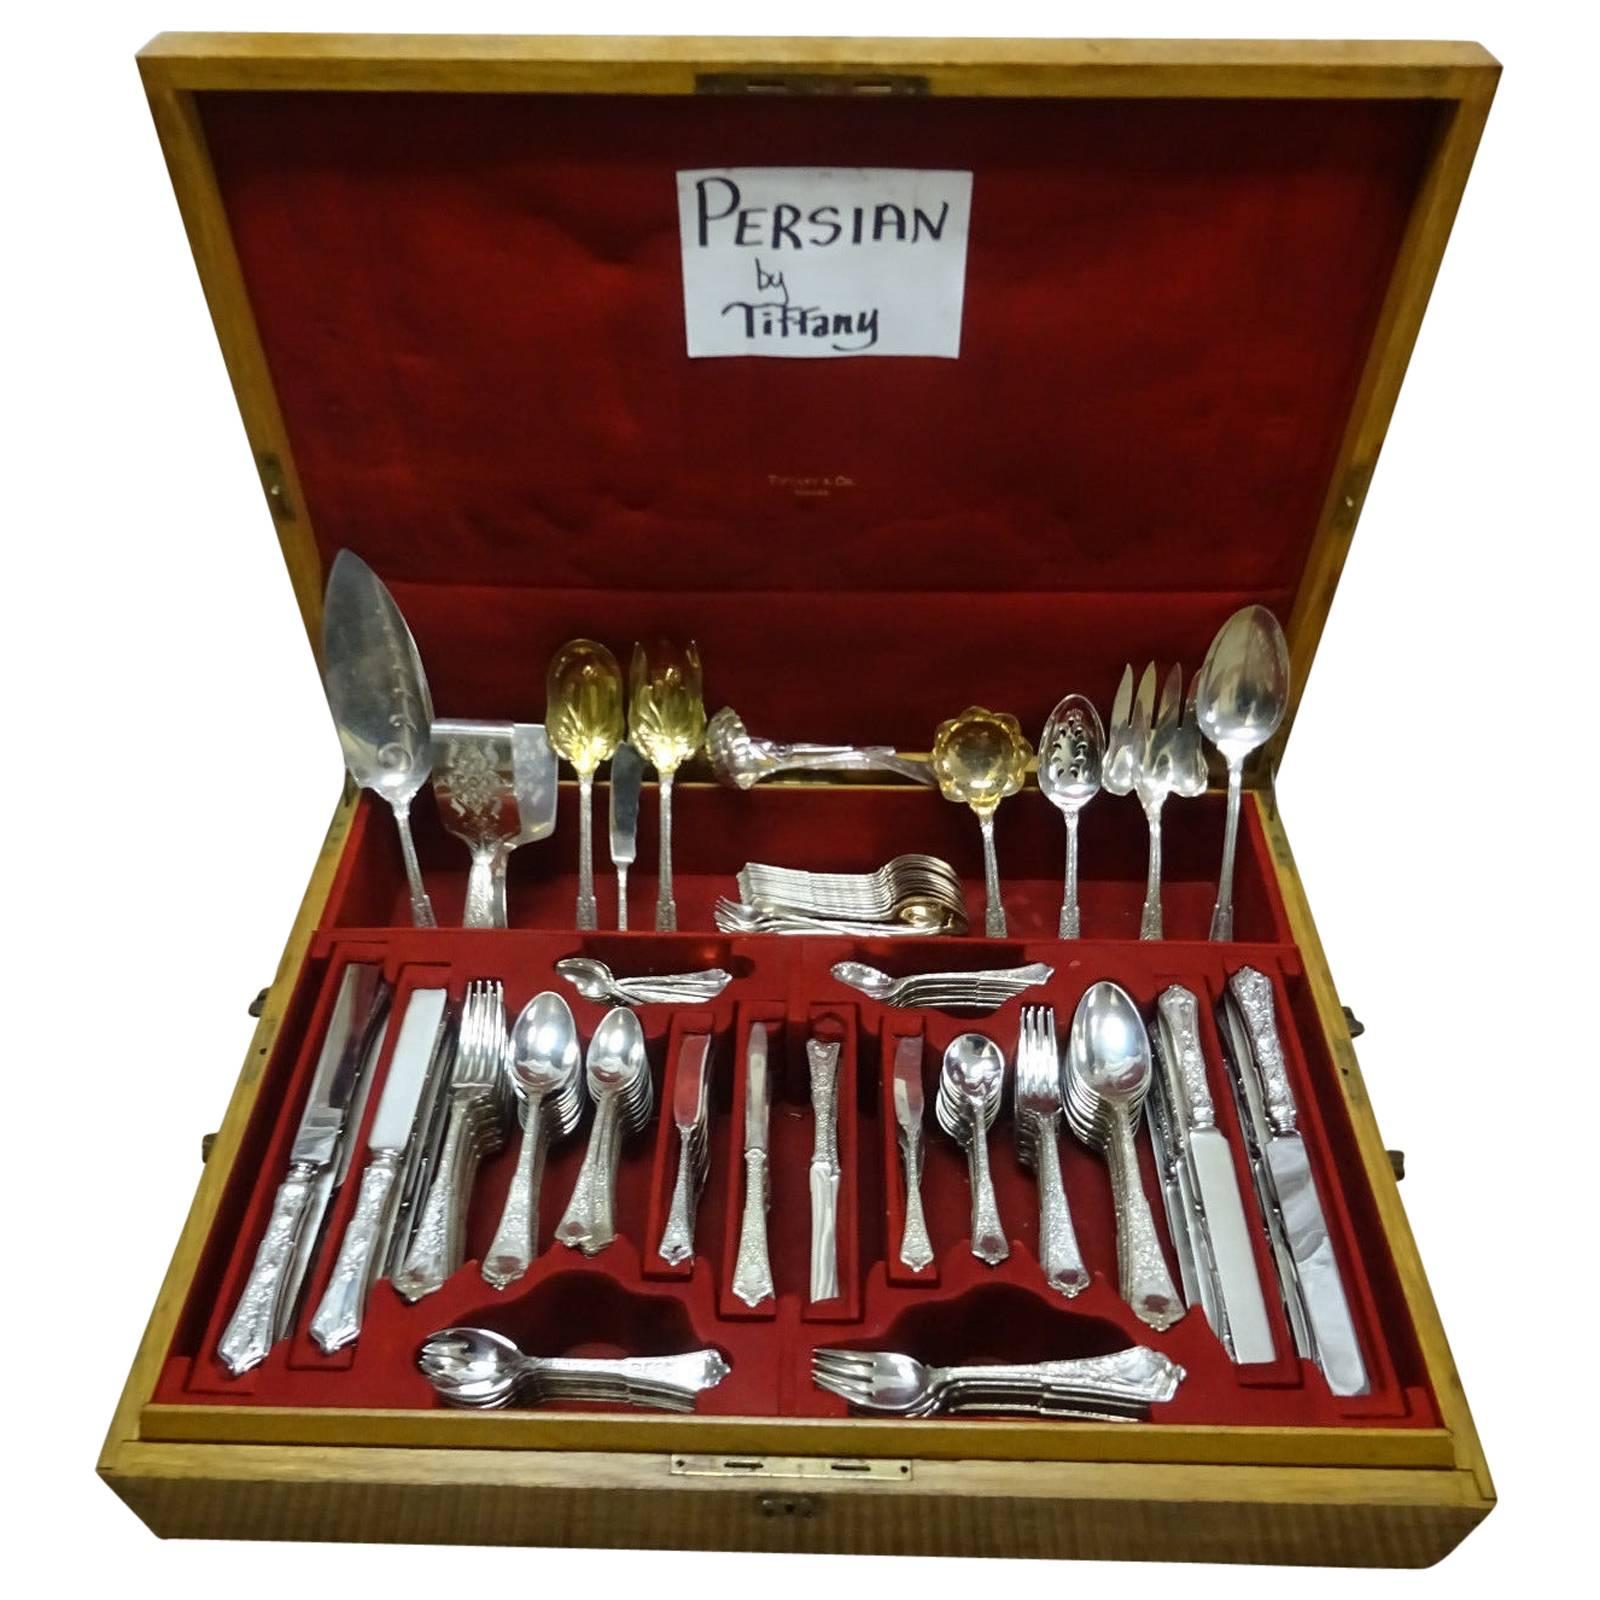 Persian by Tiffany & Co. Sterling Silver flatware set - dinner size 213 pieces in huge vintage Tiffany chest. This set includes: 12 dinner size knives, 10 3/8